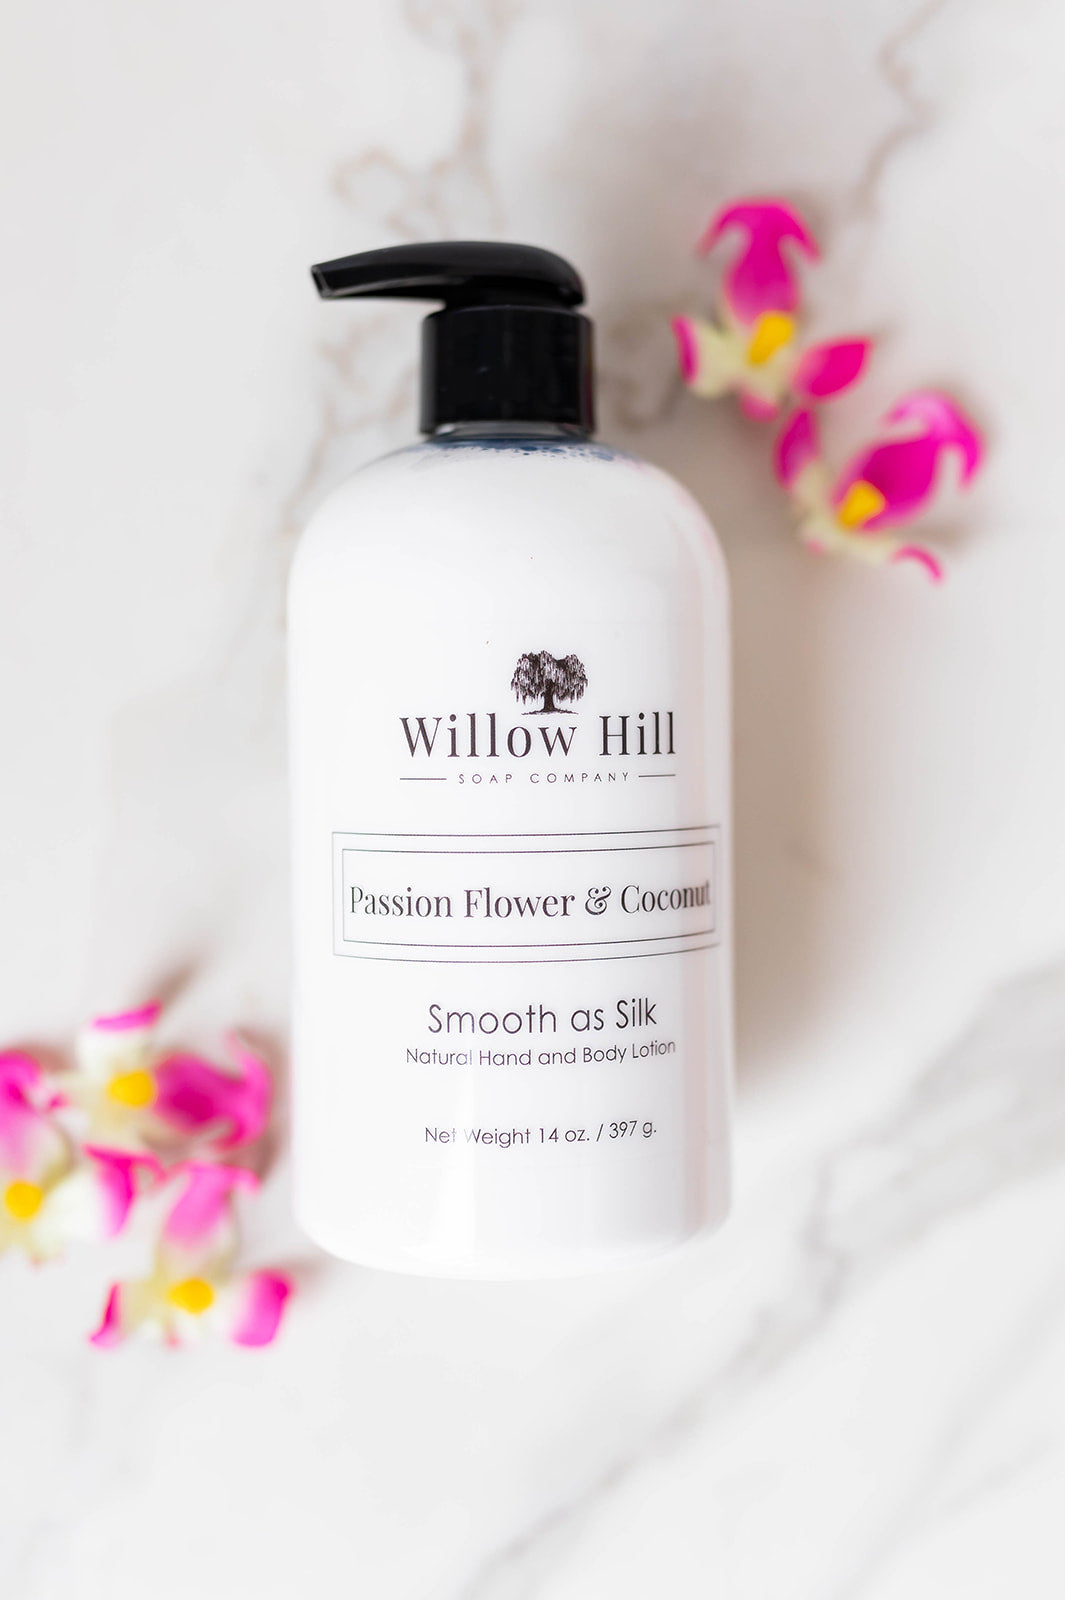 Passion Flower & Coconut Smooth as Silk Lotion